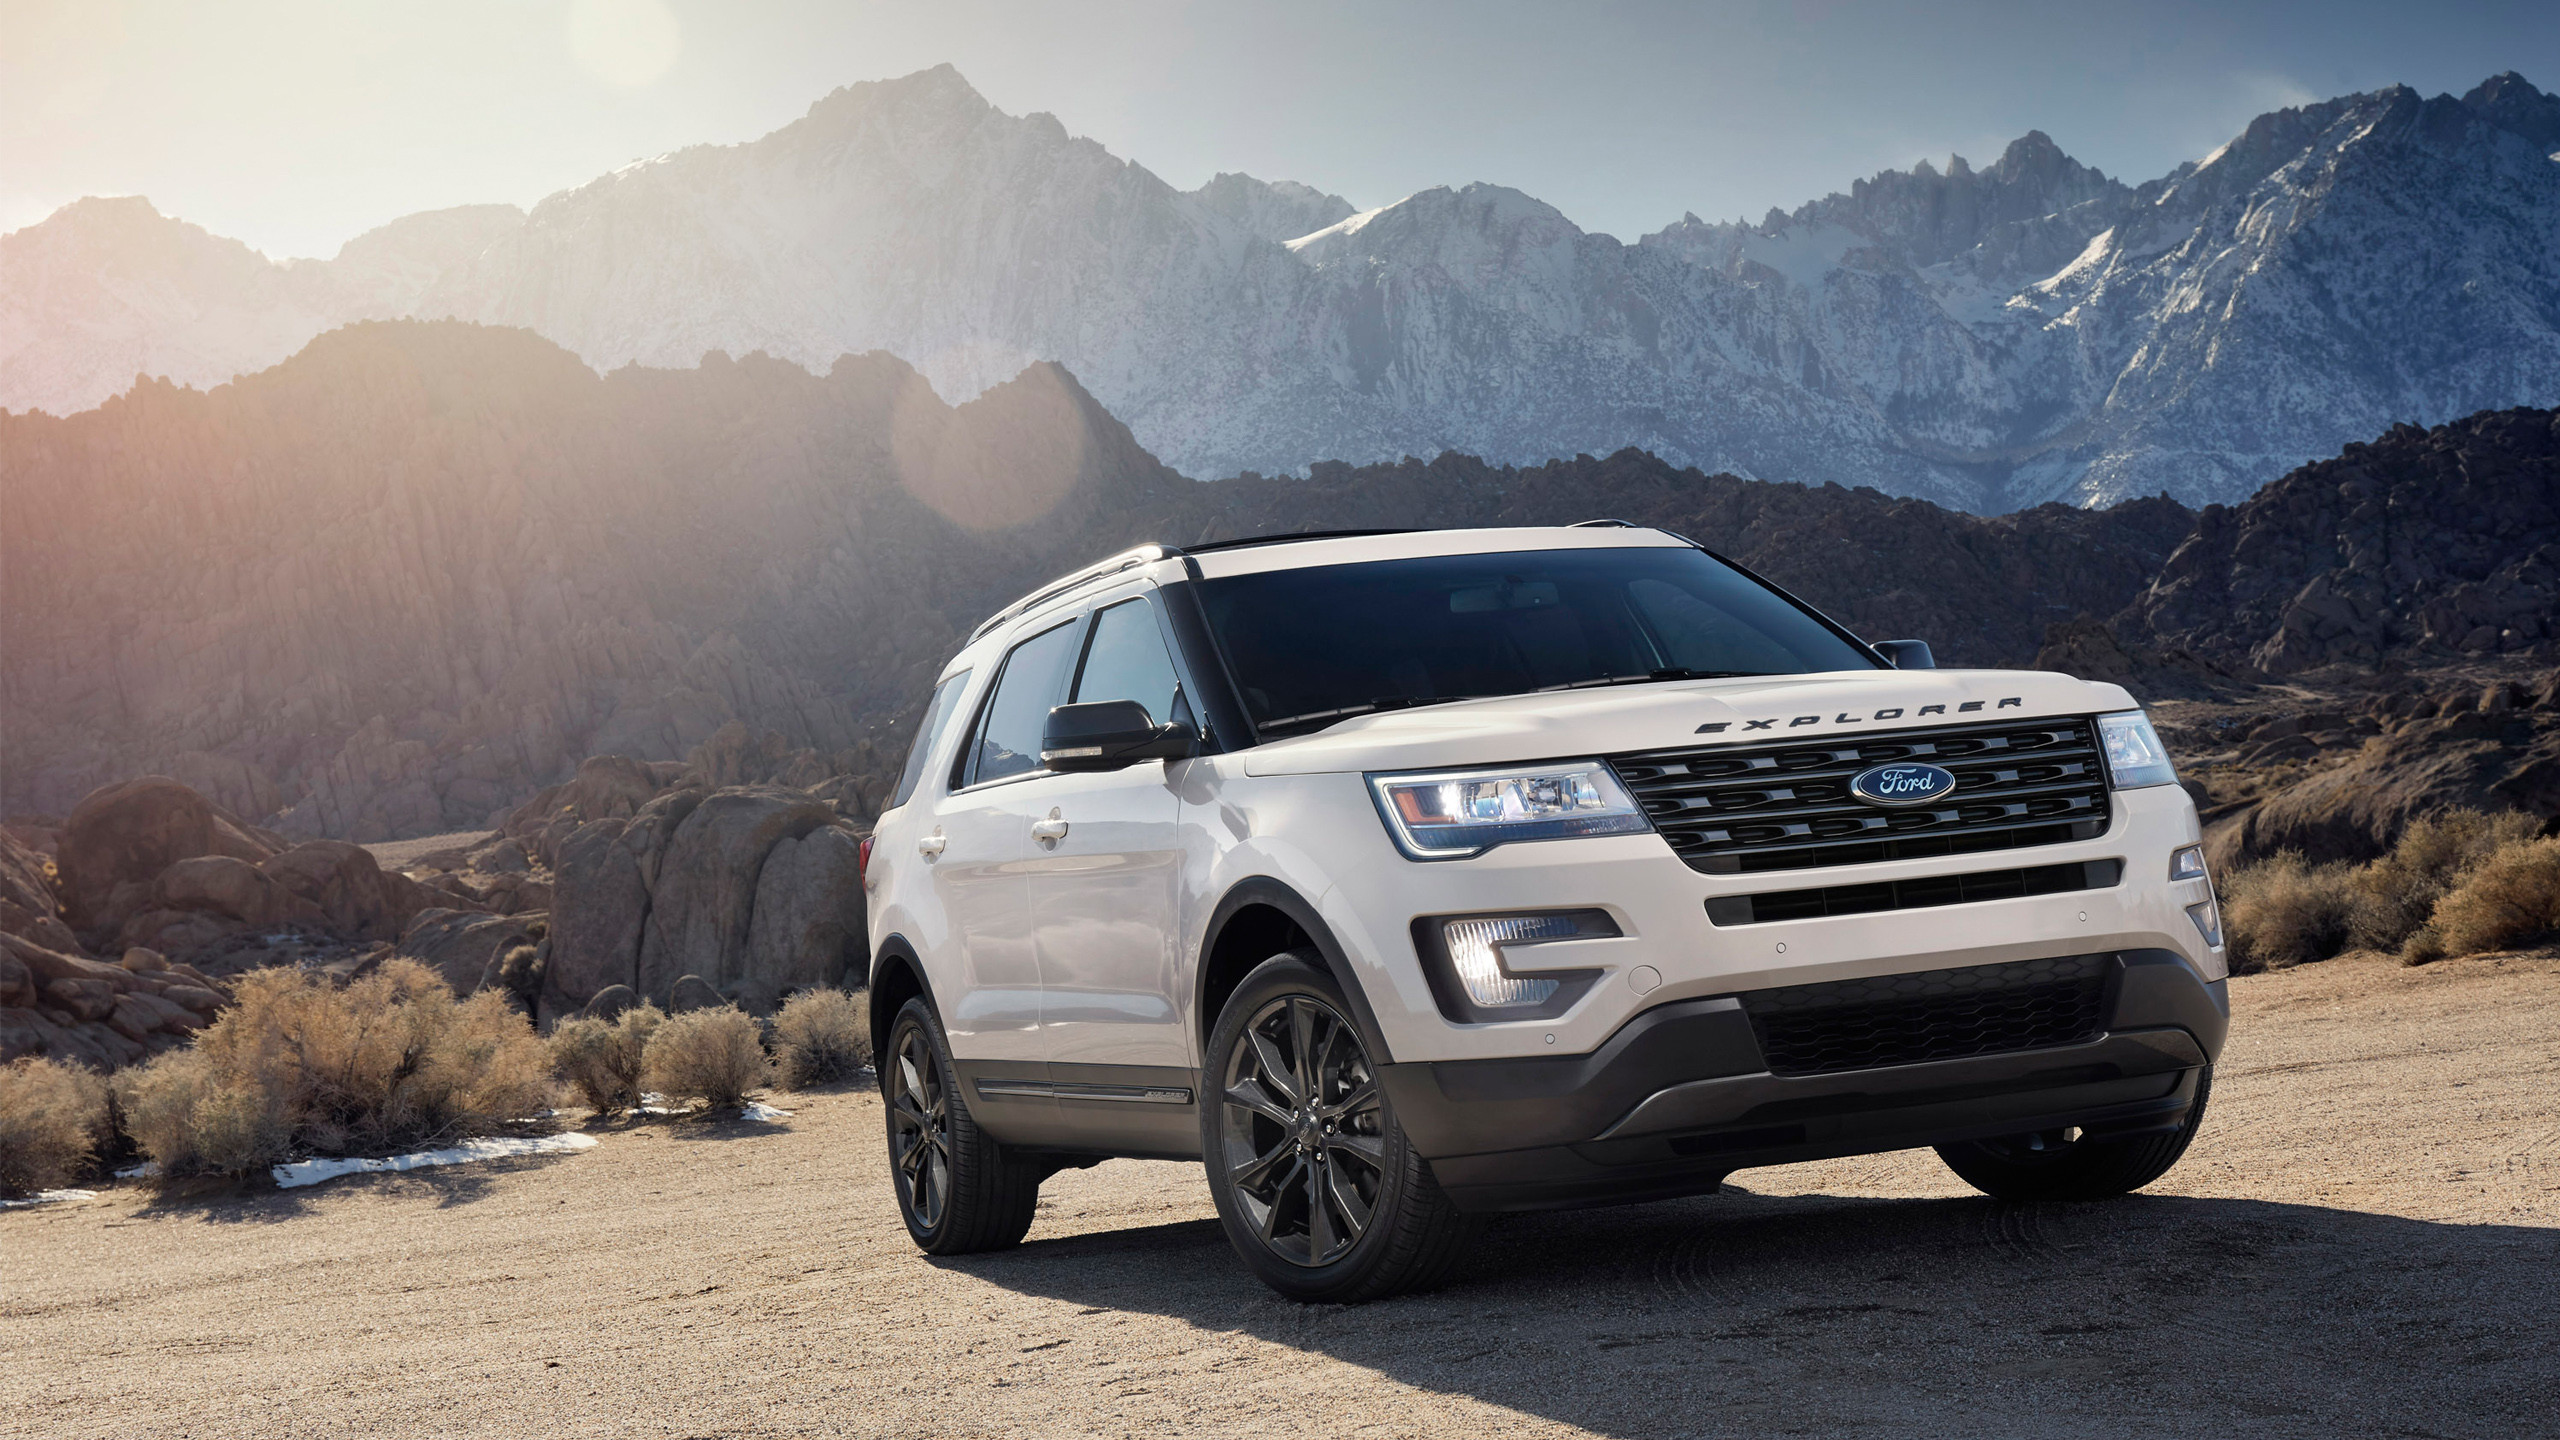 2560x1440 Ford Explorer Wallpapers